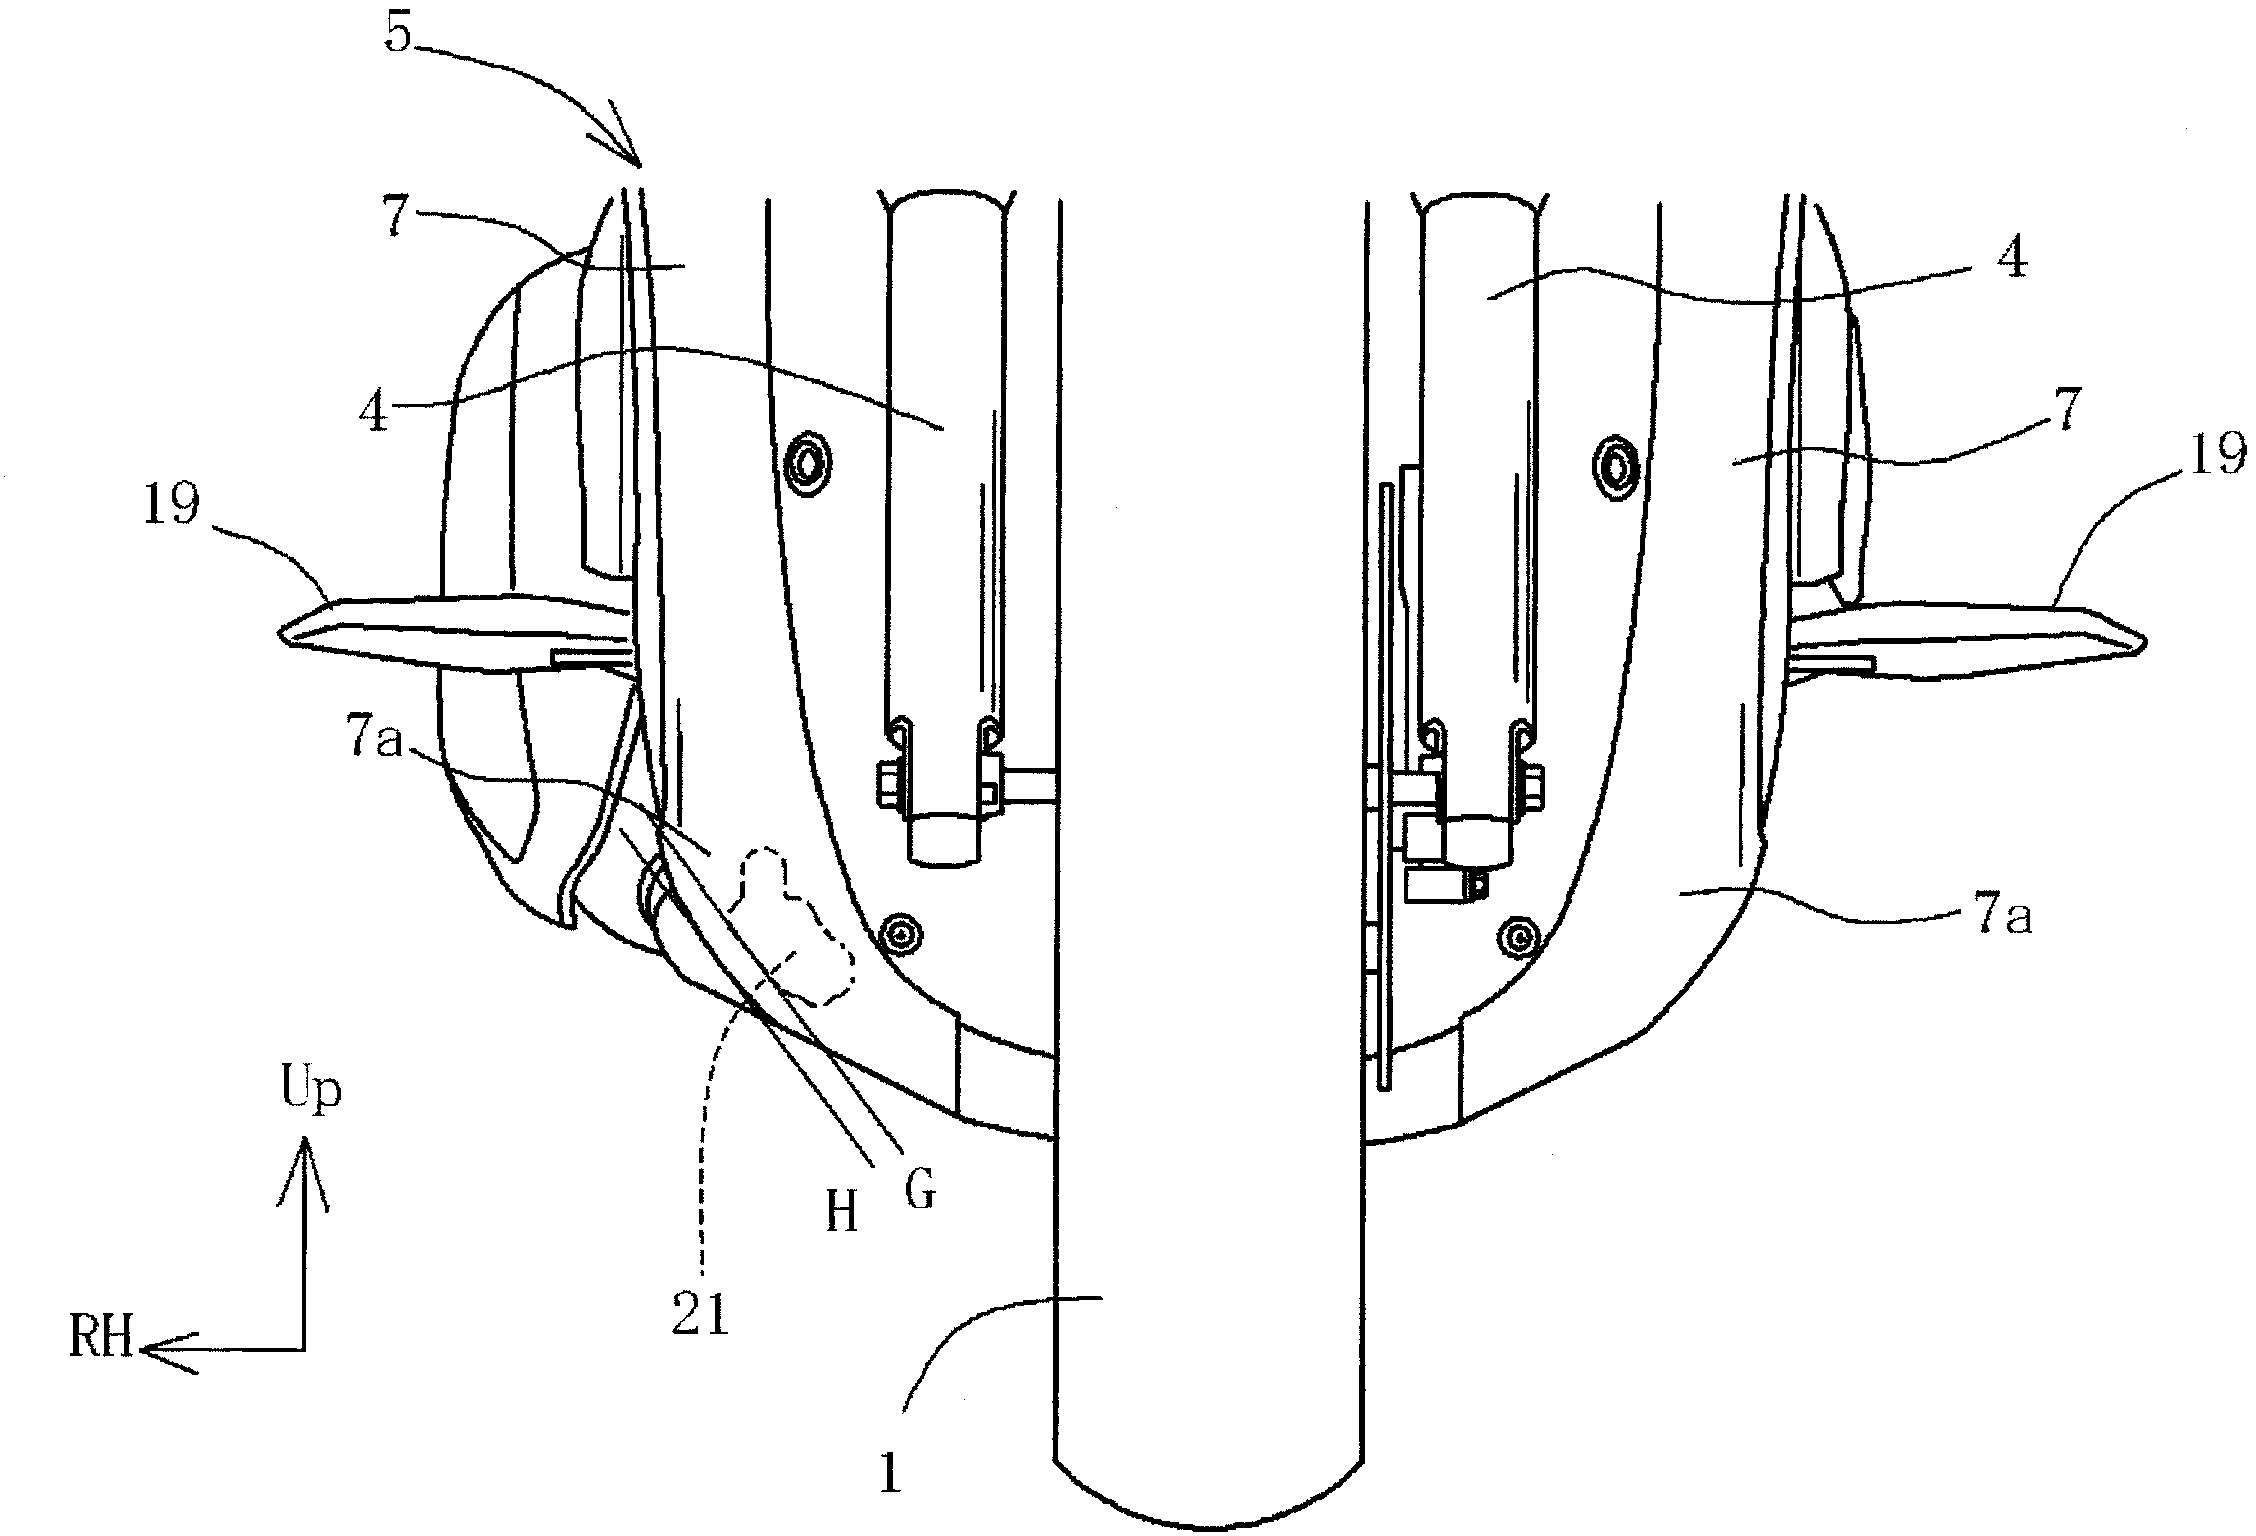 Vehicle with footboard